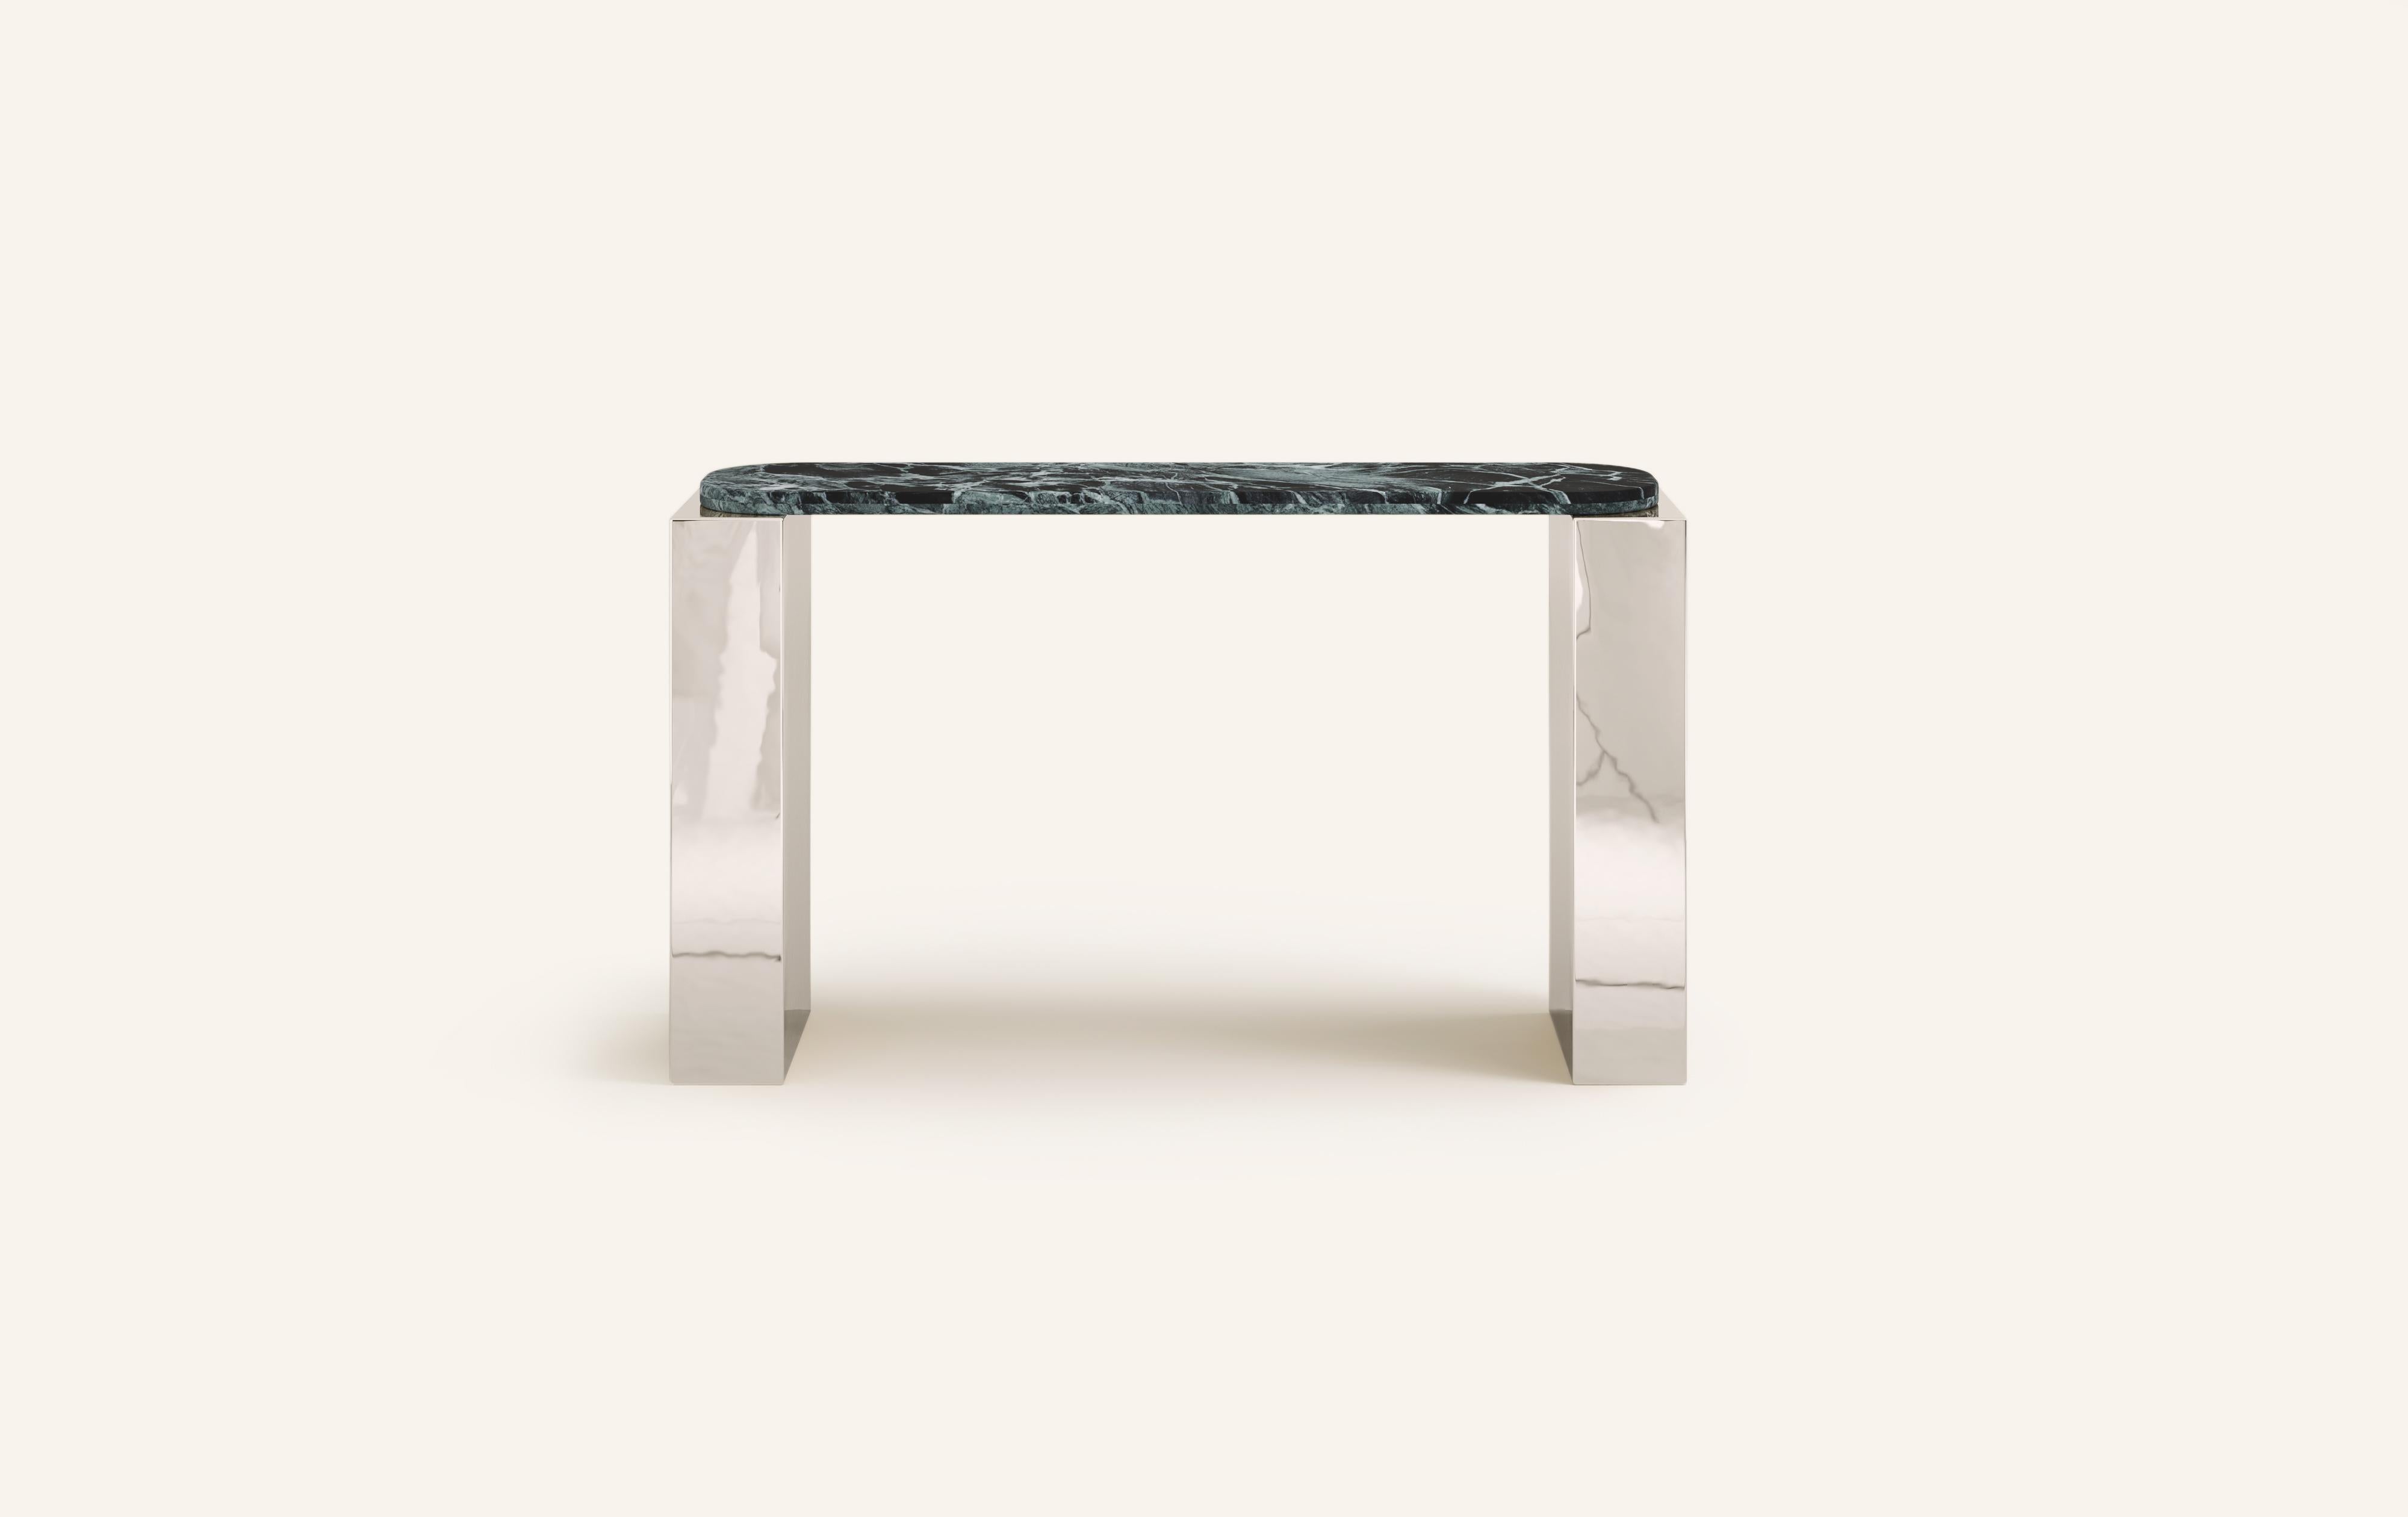 MONOLITHIC FORMS SOFTENED BY GENTLE EDGES. WITH ITS BOLD MARBLE PATTERNS CUBO IS AS VERSATILE AS IT IS STRIKING.

DIMENSIONS:
62”L x 17”W x 36”H: 
- 60”L x 15”W x 1.5” THICK TABLETOP WITH WITH 6